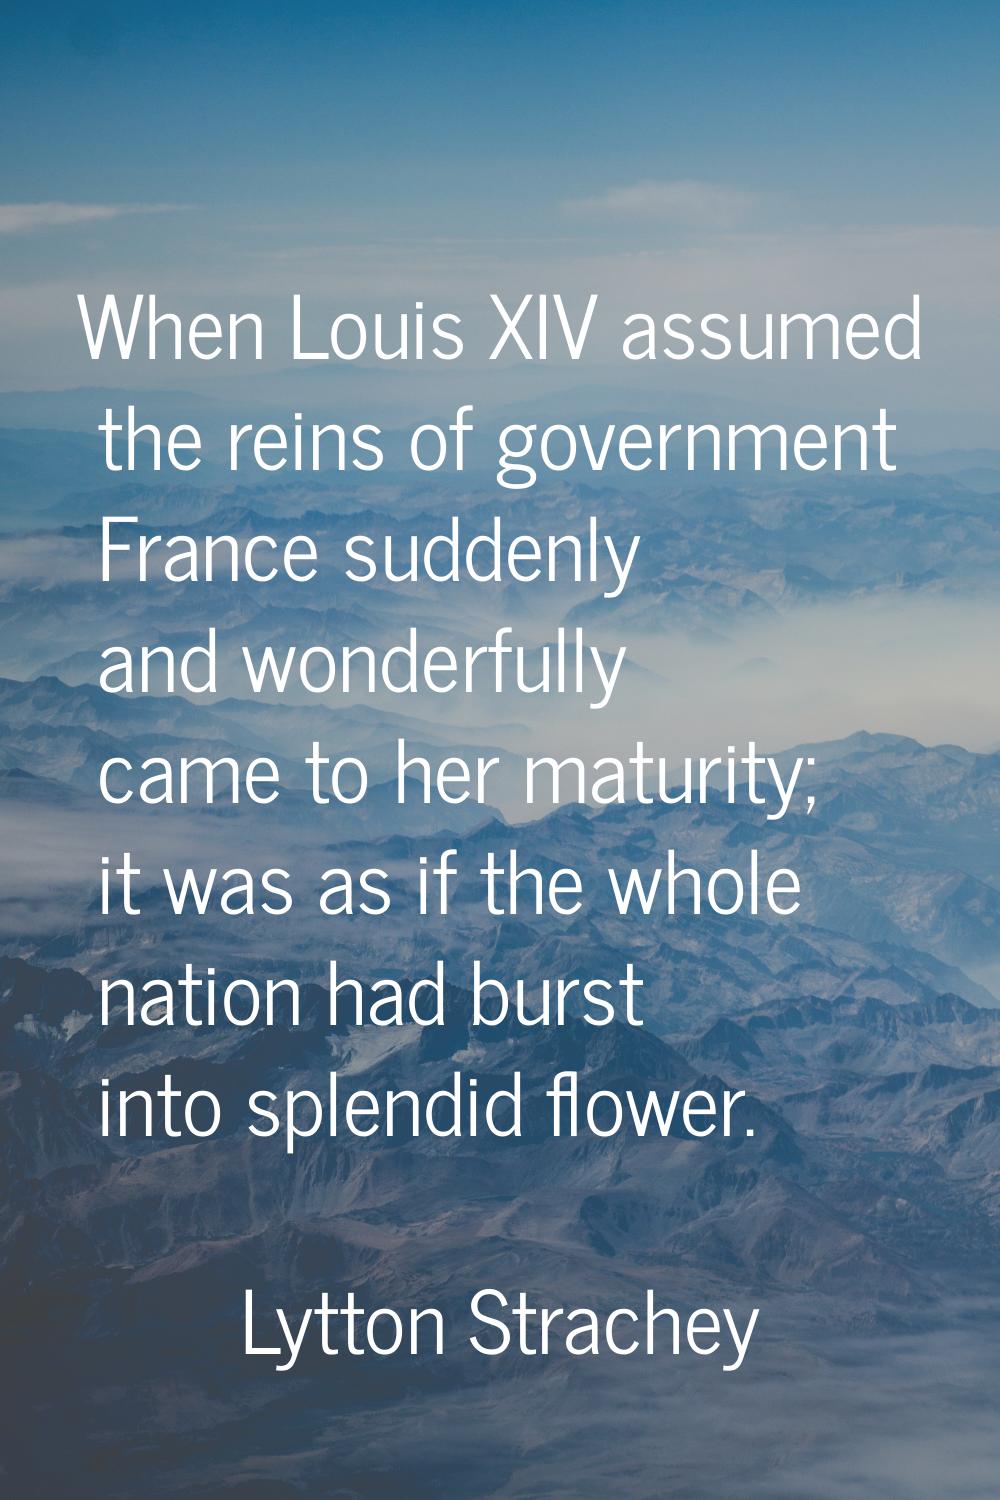 When Louis XIV assumed the reins of government France suddenly and wonderfully came to her maturity